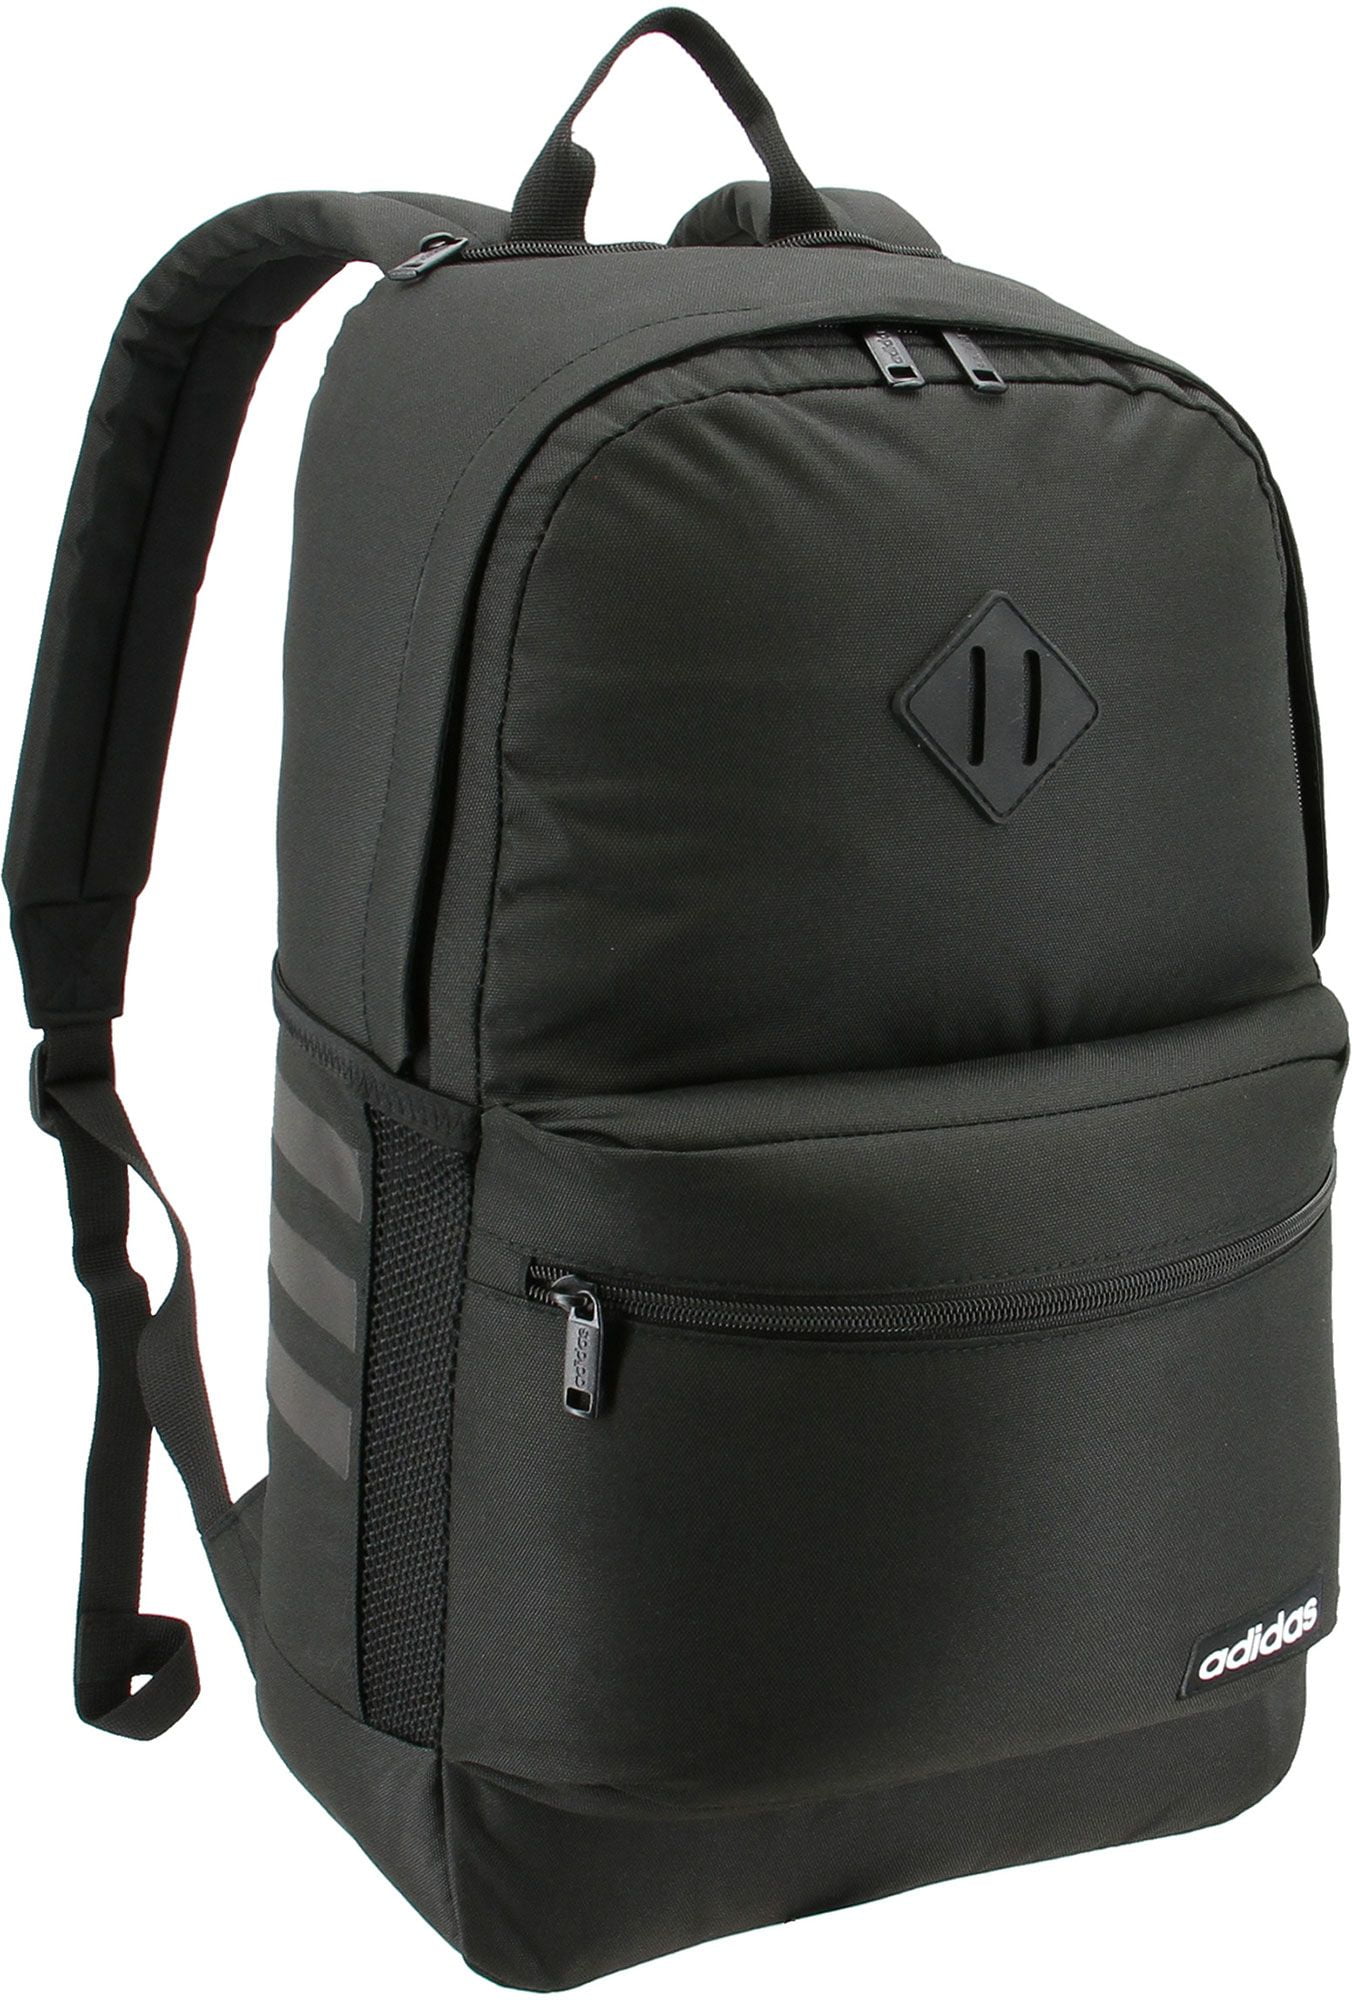 adidas classic 3s backpack review